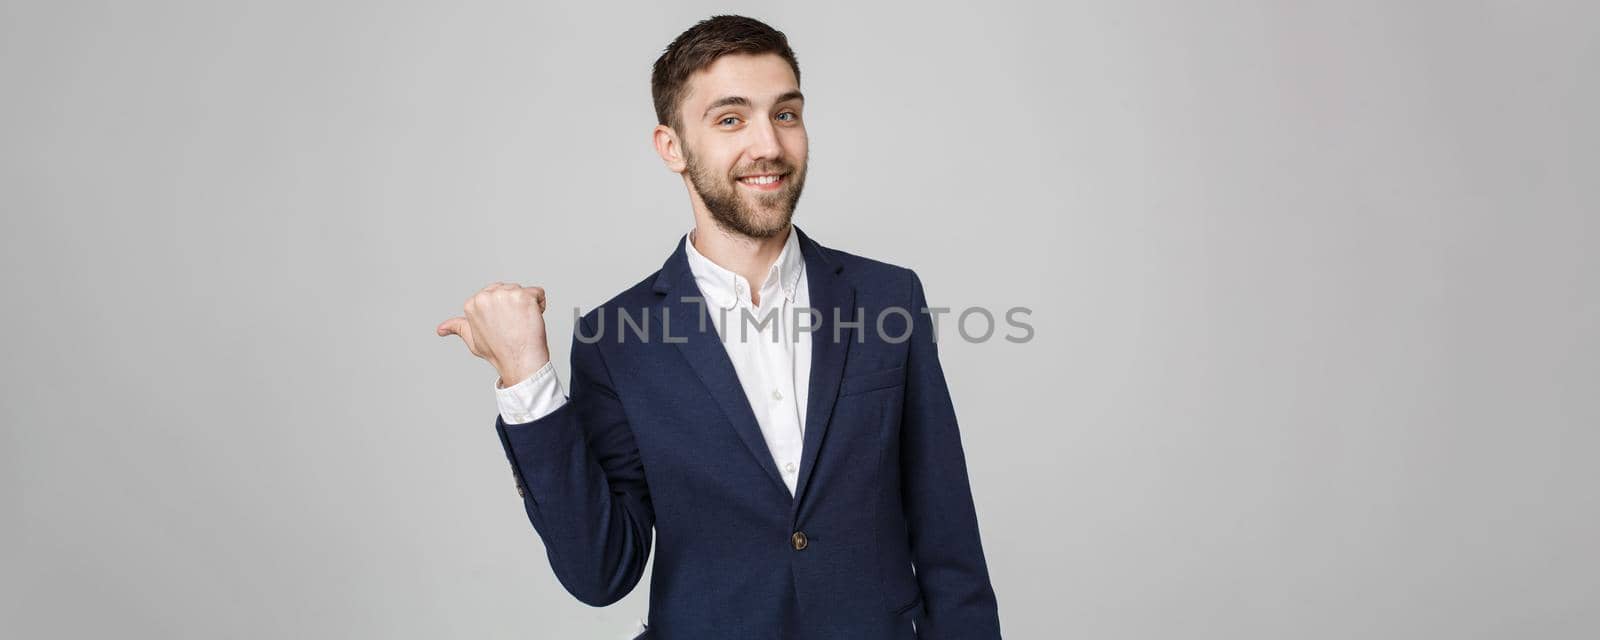 Business Concept - portrait young successful businessman posing over dark background. Copy space.